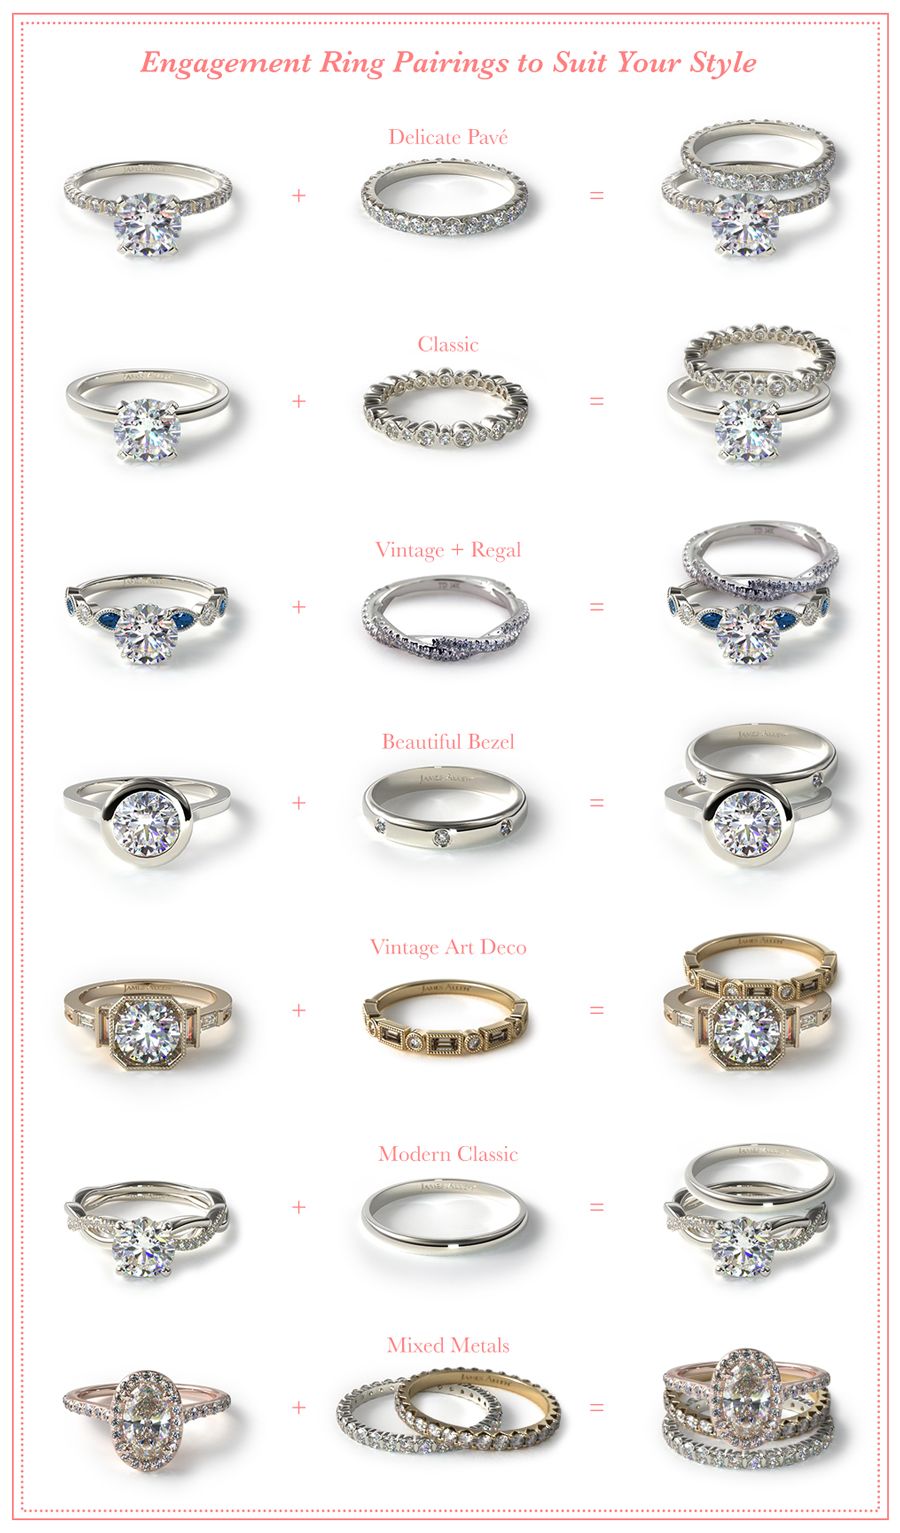 Engagement Rings 101 As Seen On Pinterest Wedding Ring Bands